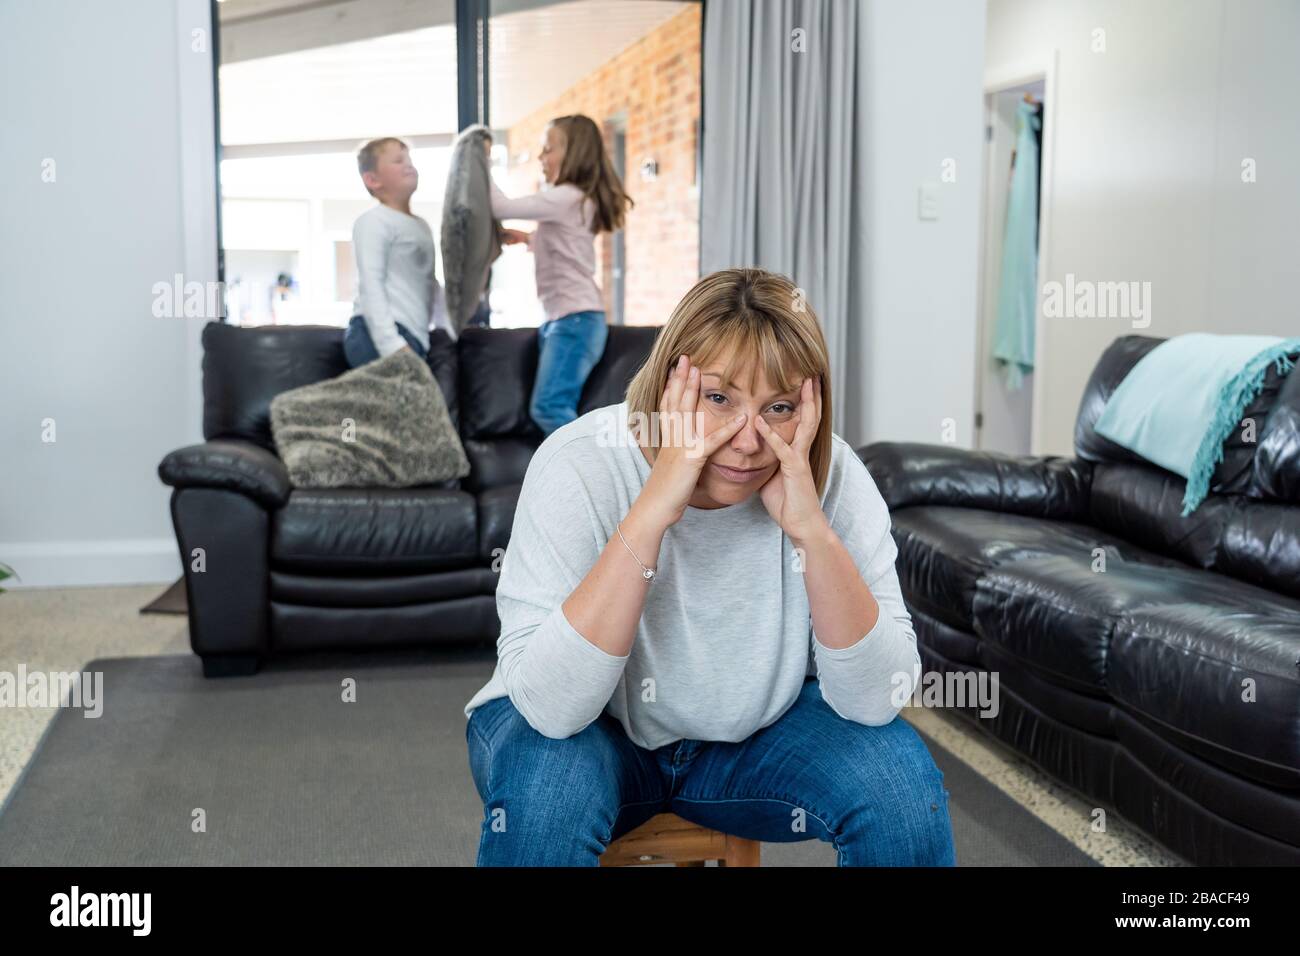 Stressed out parents struggling with having the children at home during Coronavirus self-isolation. Mother and father trying to cope with anxious kids Stock Photo